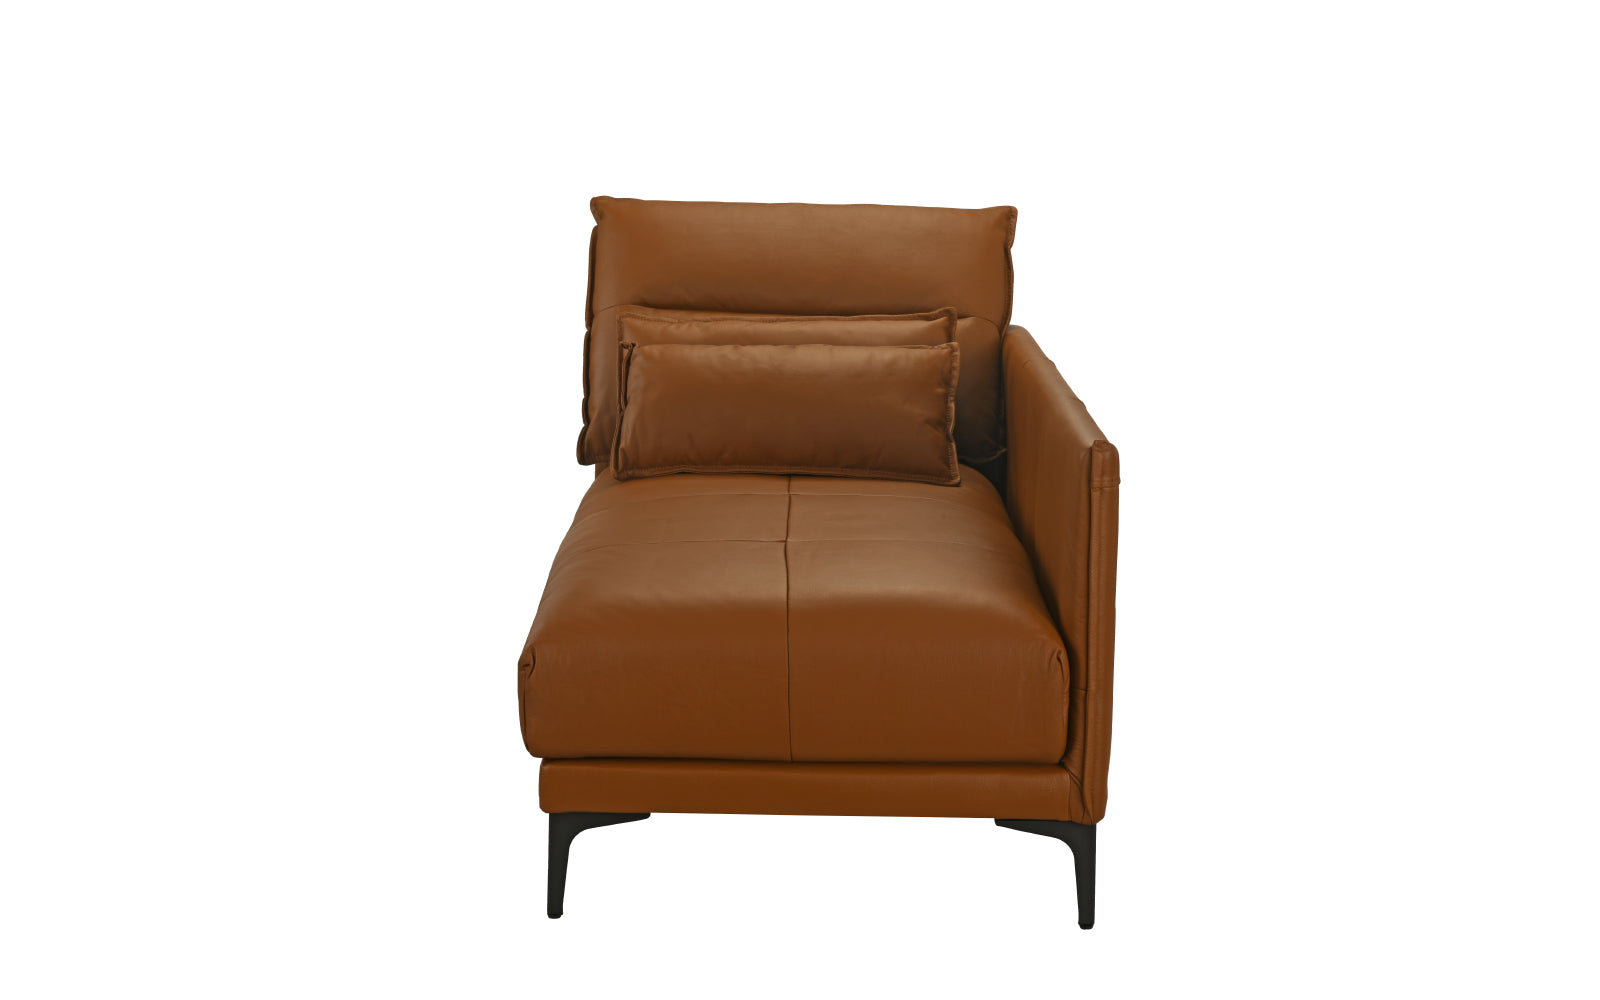 EXP337-CAMEL Tony New Wave Leather Match Chaise Lounge sku EXP337-CAMEL